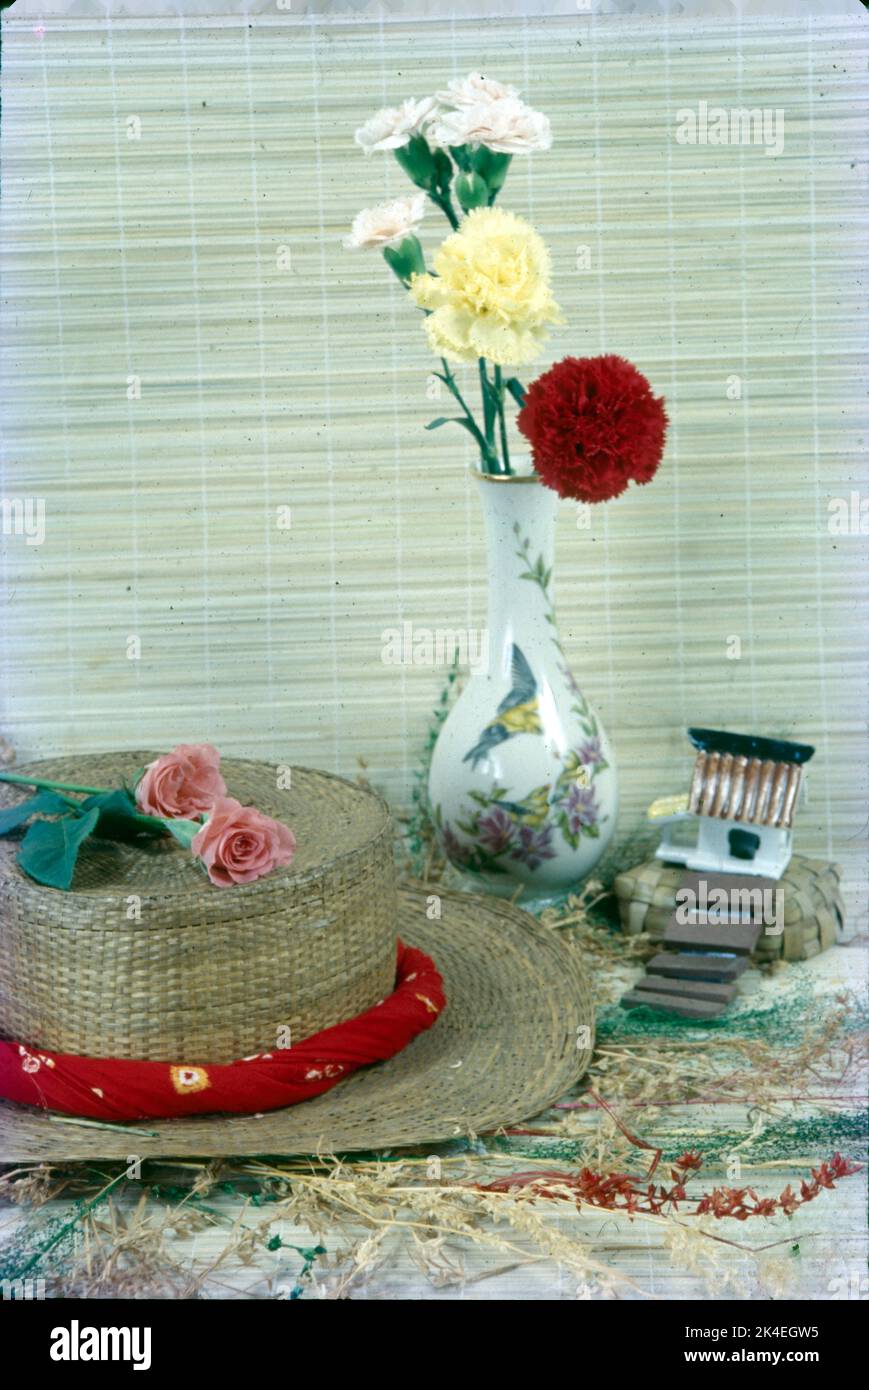 Dry Flower Arrangement on a Hat on the Mat Stock Photo